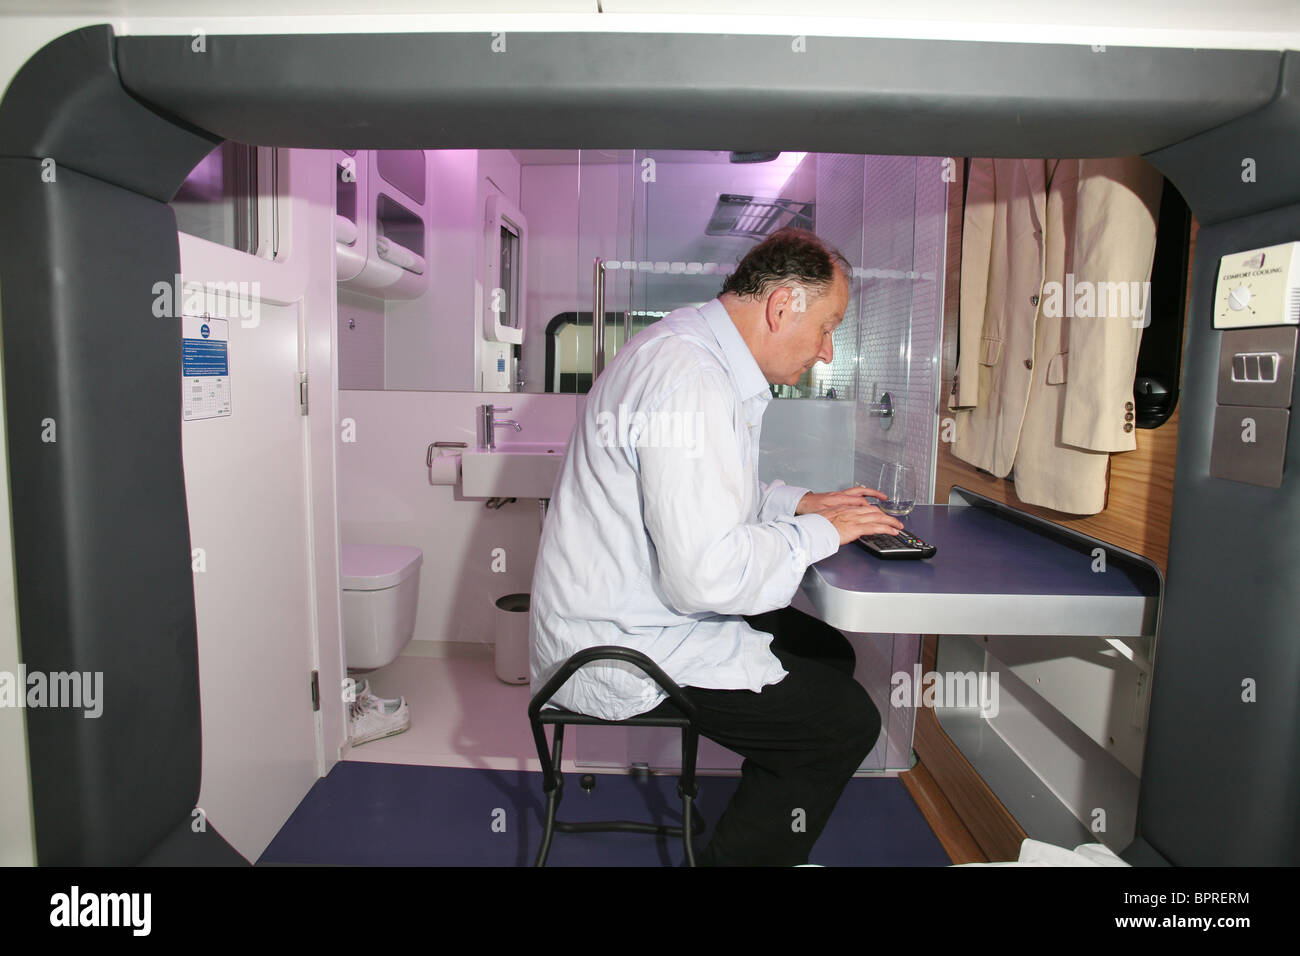 Image shows a man staying at Yotel, a budget hotel made of tiny cabins, Gatwick Airport, England, UK. Photo:Jeff Gilbert Stock Photo